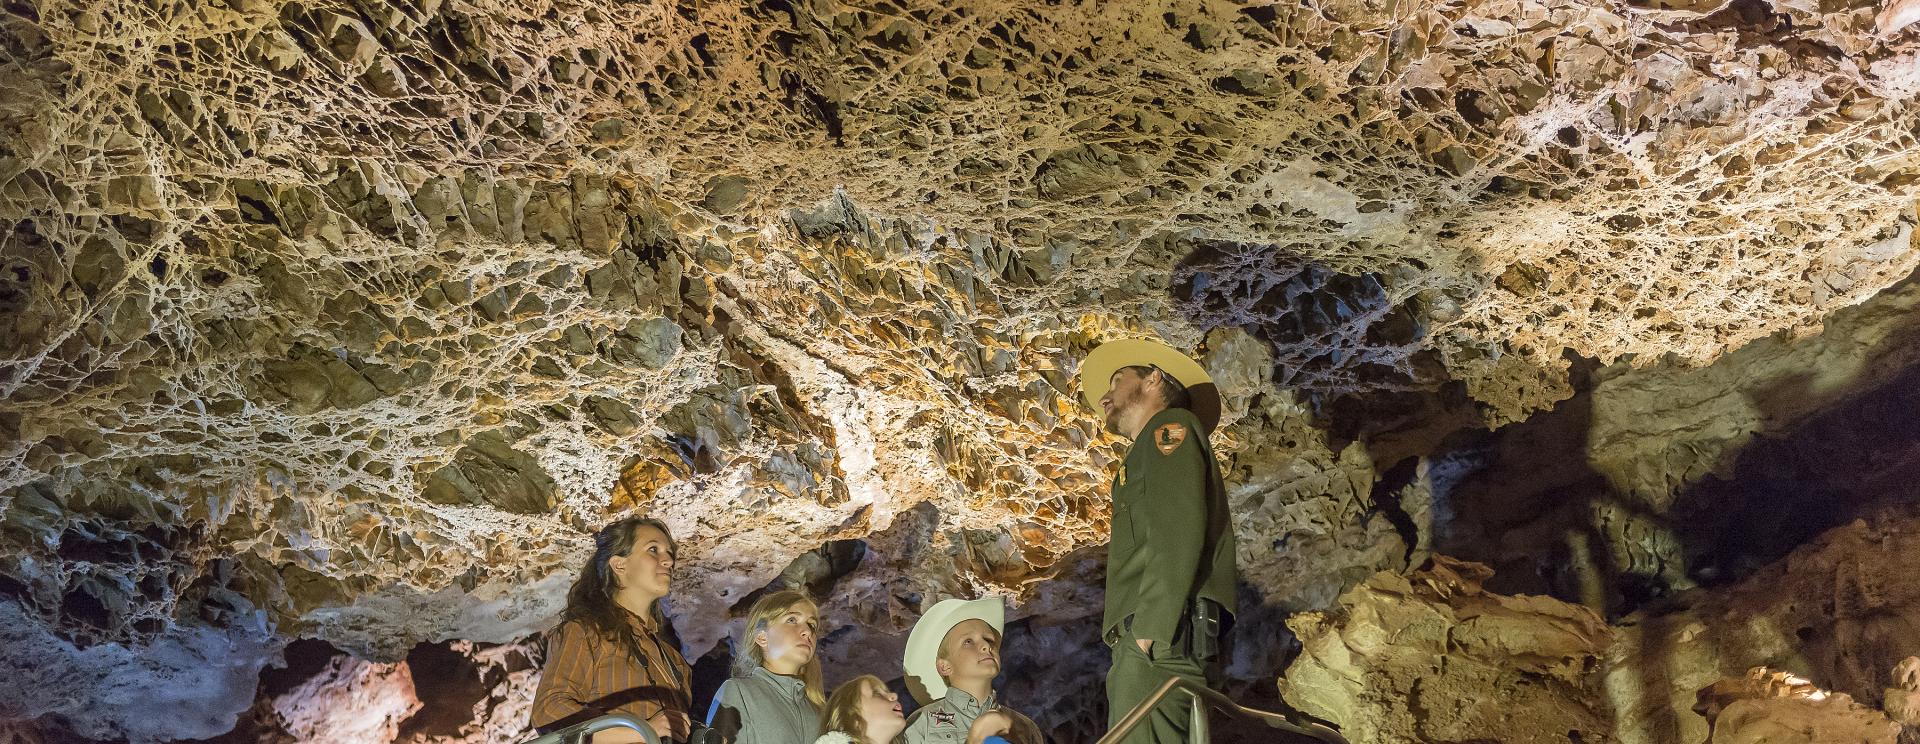 The Underground Wilderness: Looking for a Cool Adventure? Check Out a Black Hills Cave